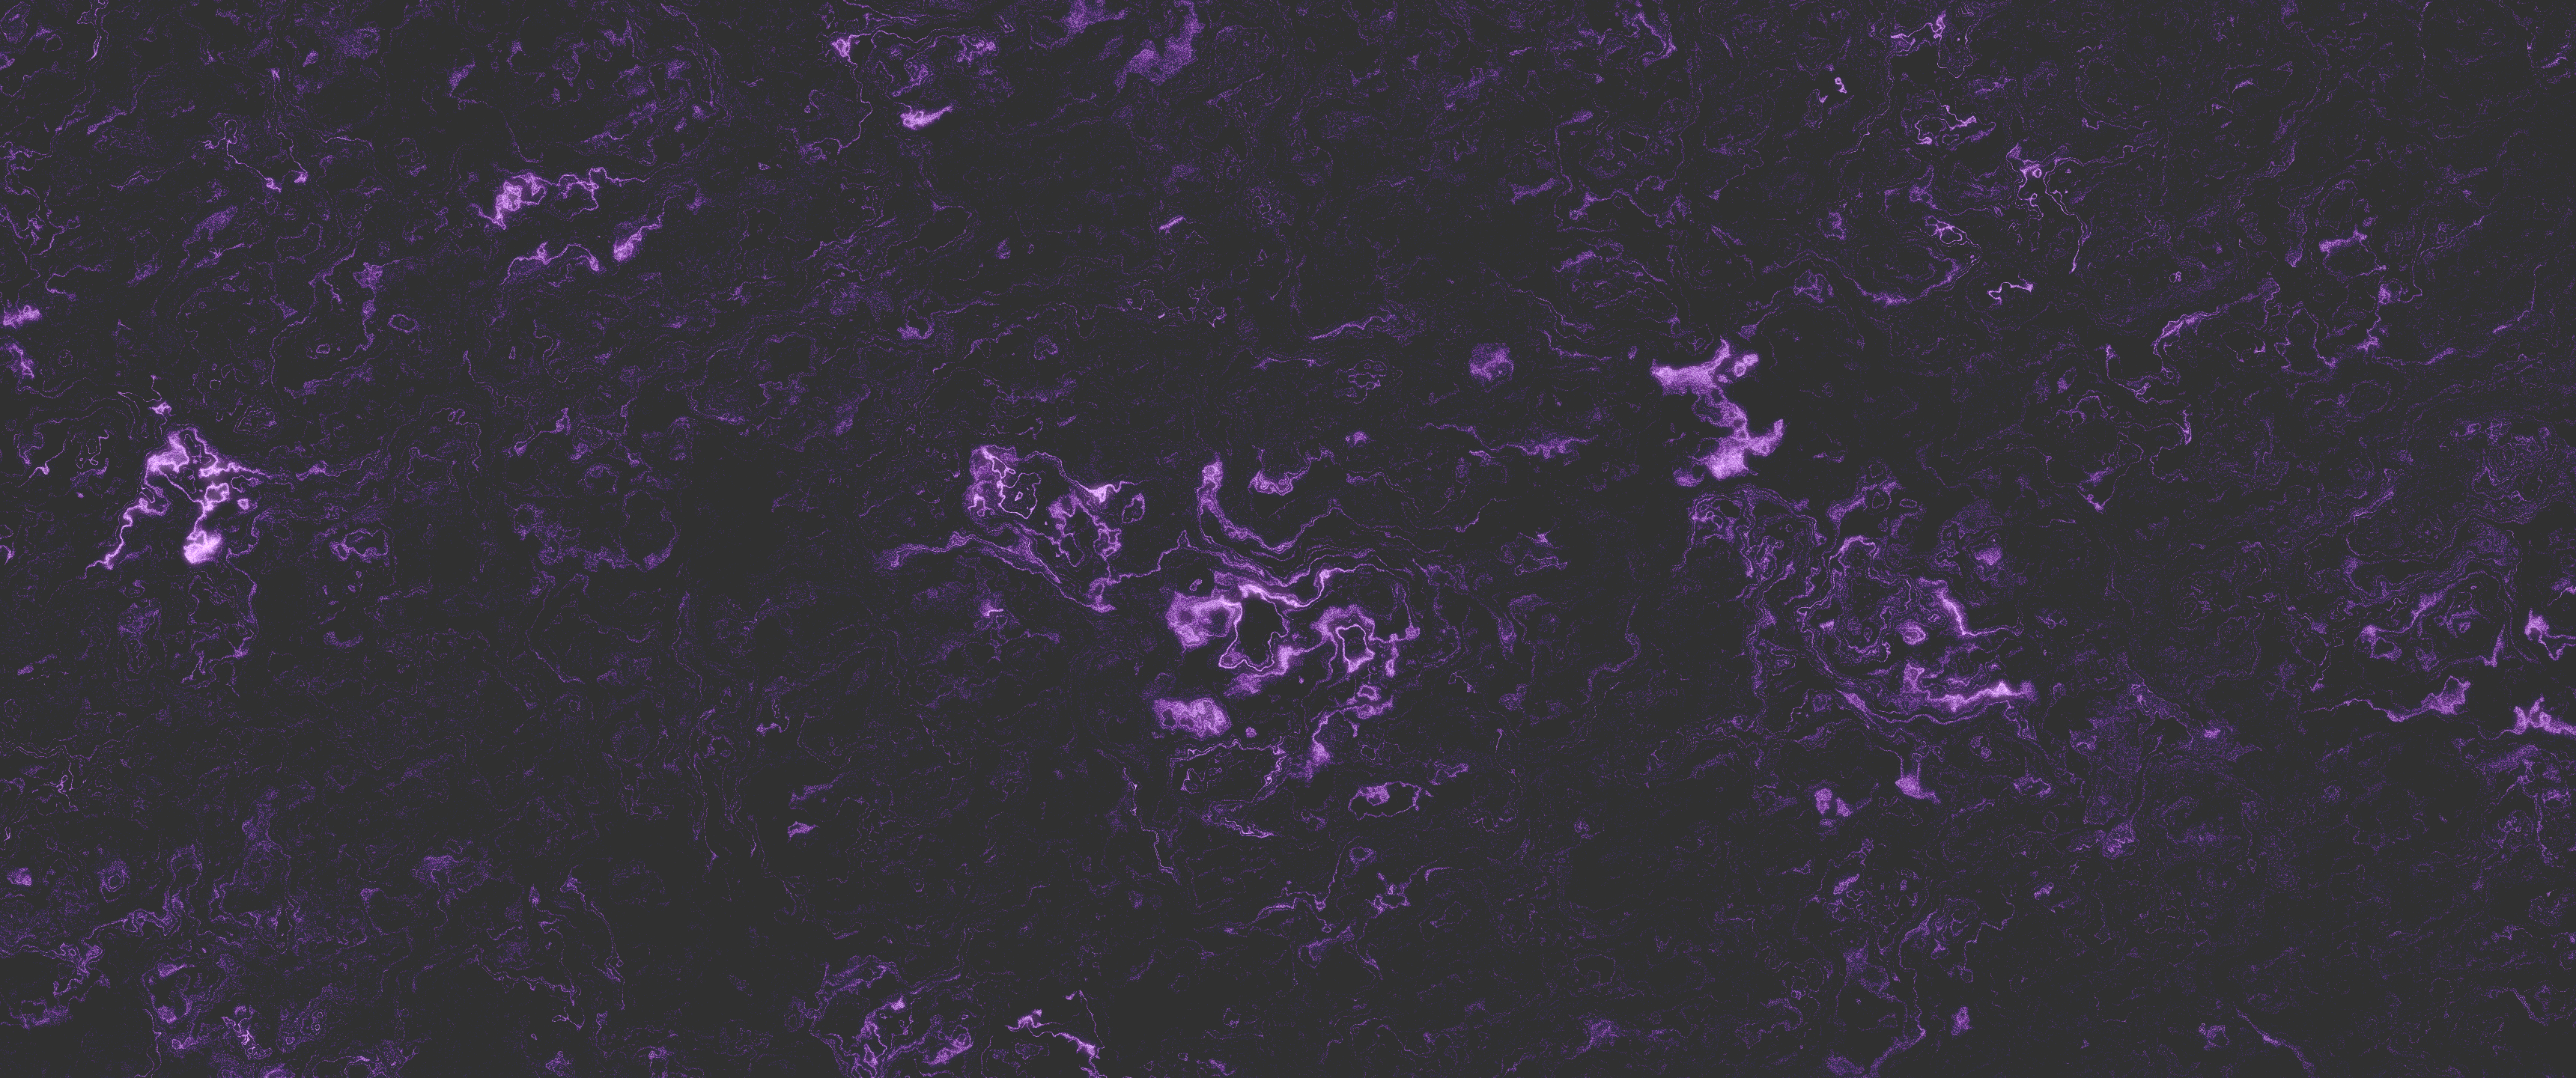 General 3440x1440 purple abstract